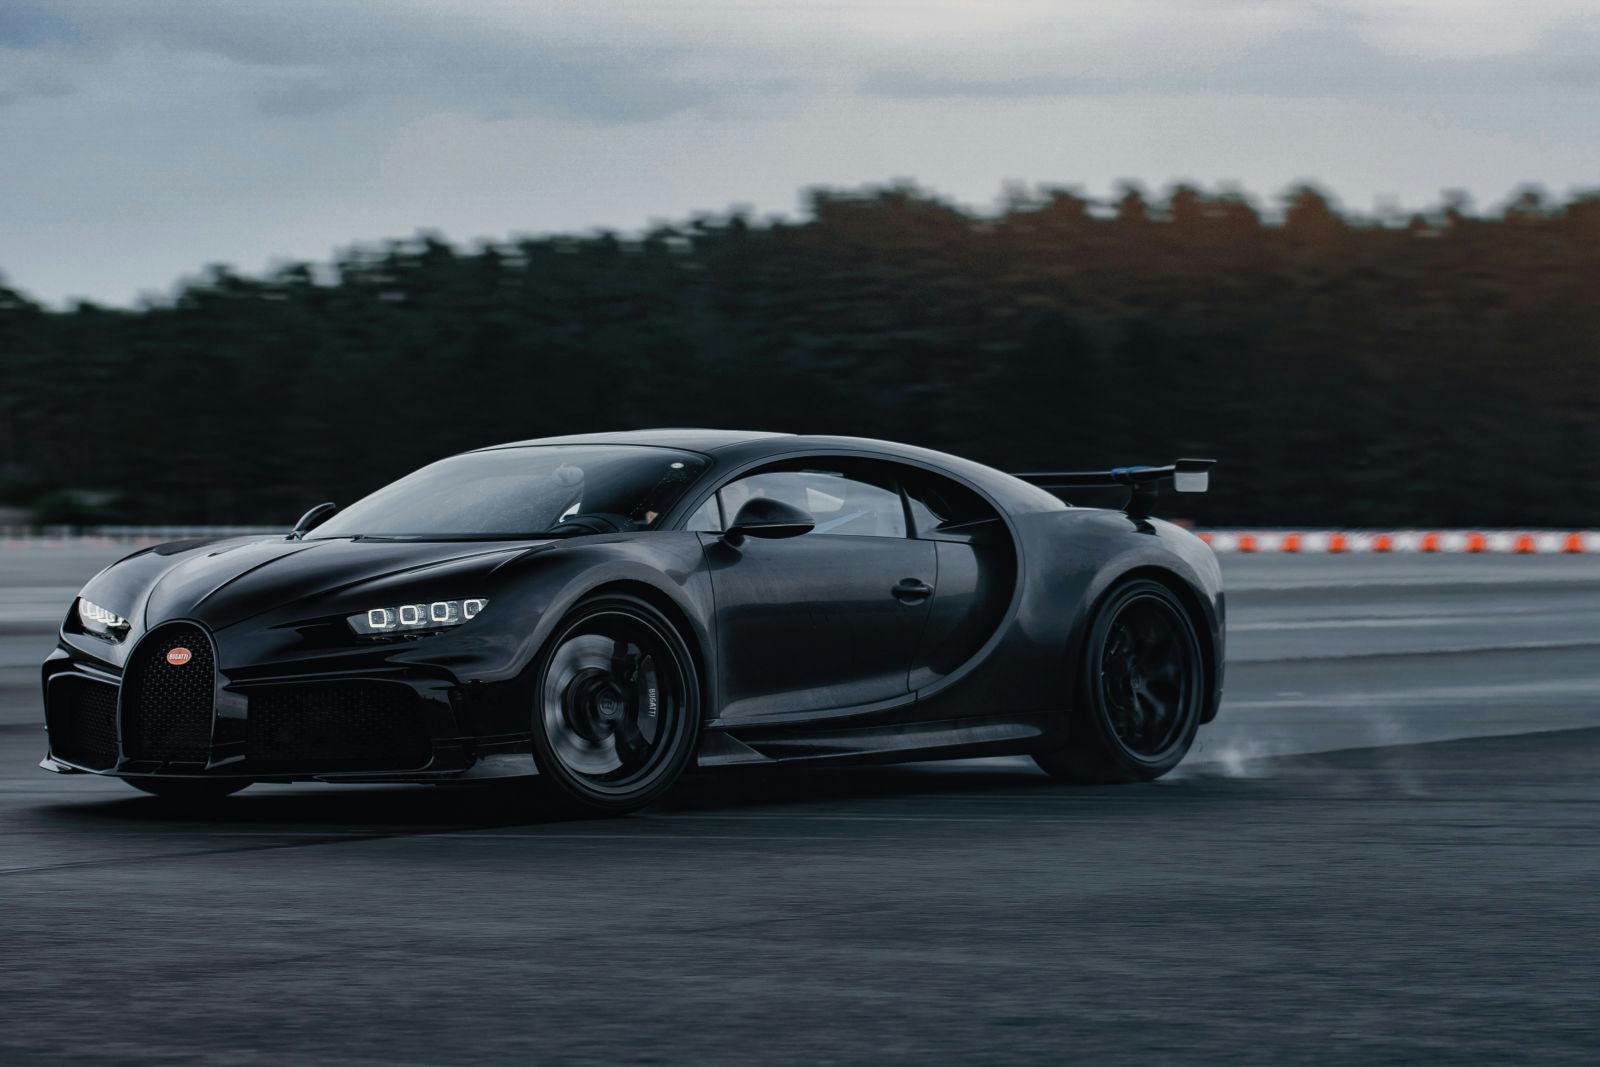 The Chiron Pur Sport proudly displays the famous Bugatti C-line.